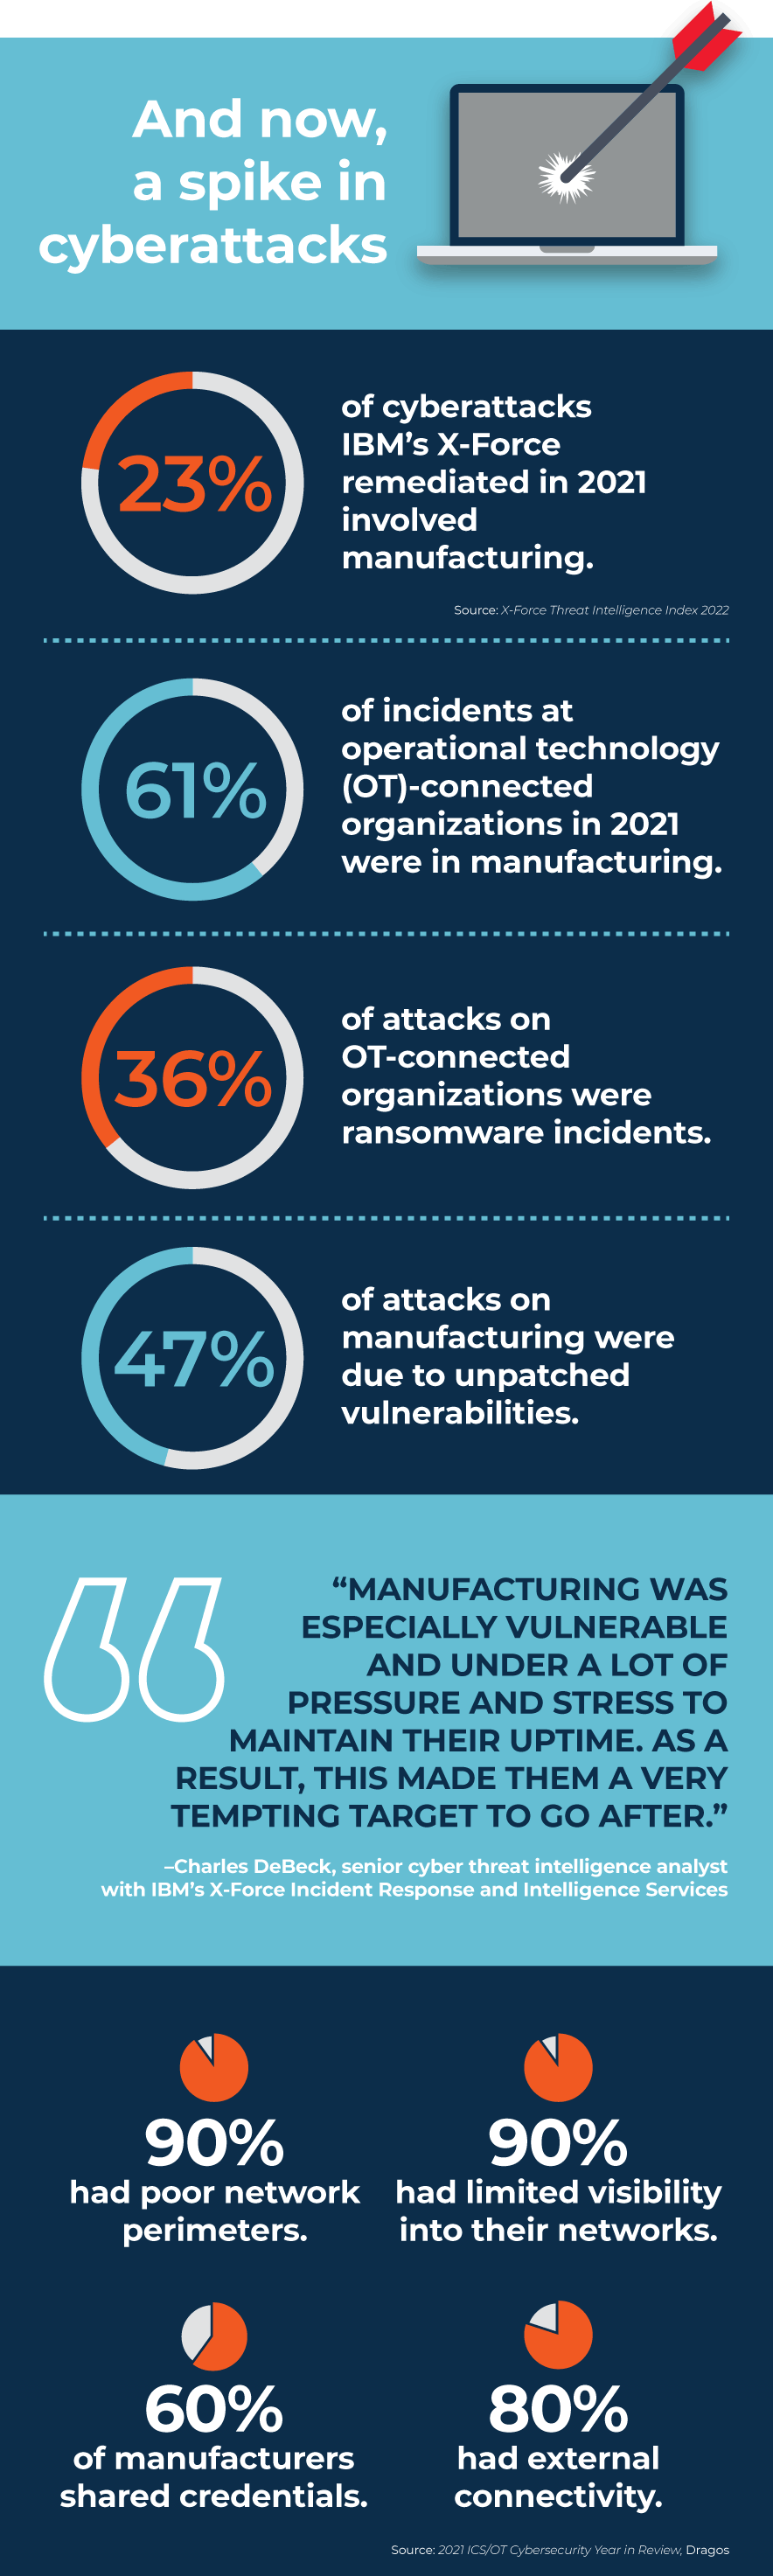 0722-Infographic-Cyber-Target-Manufacturing-04.gif